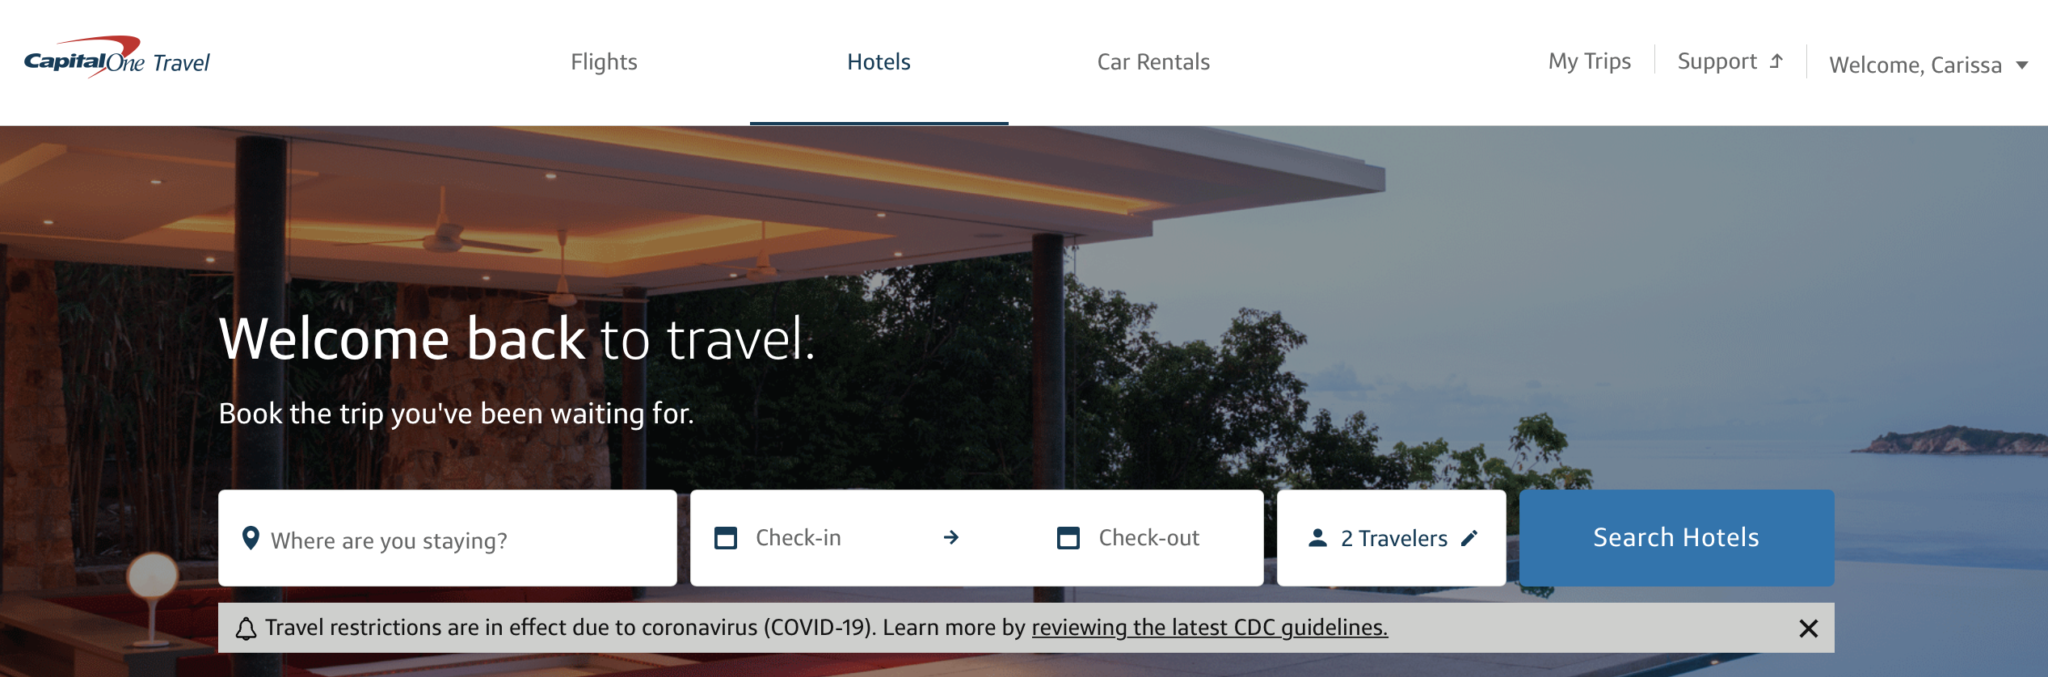 capital one travel page